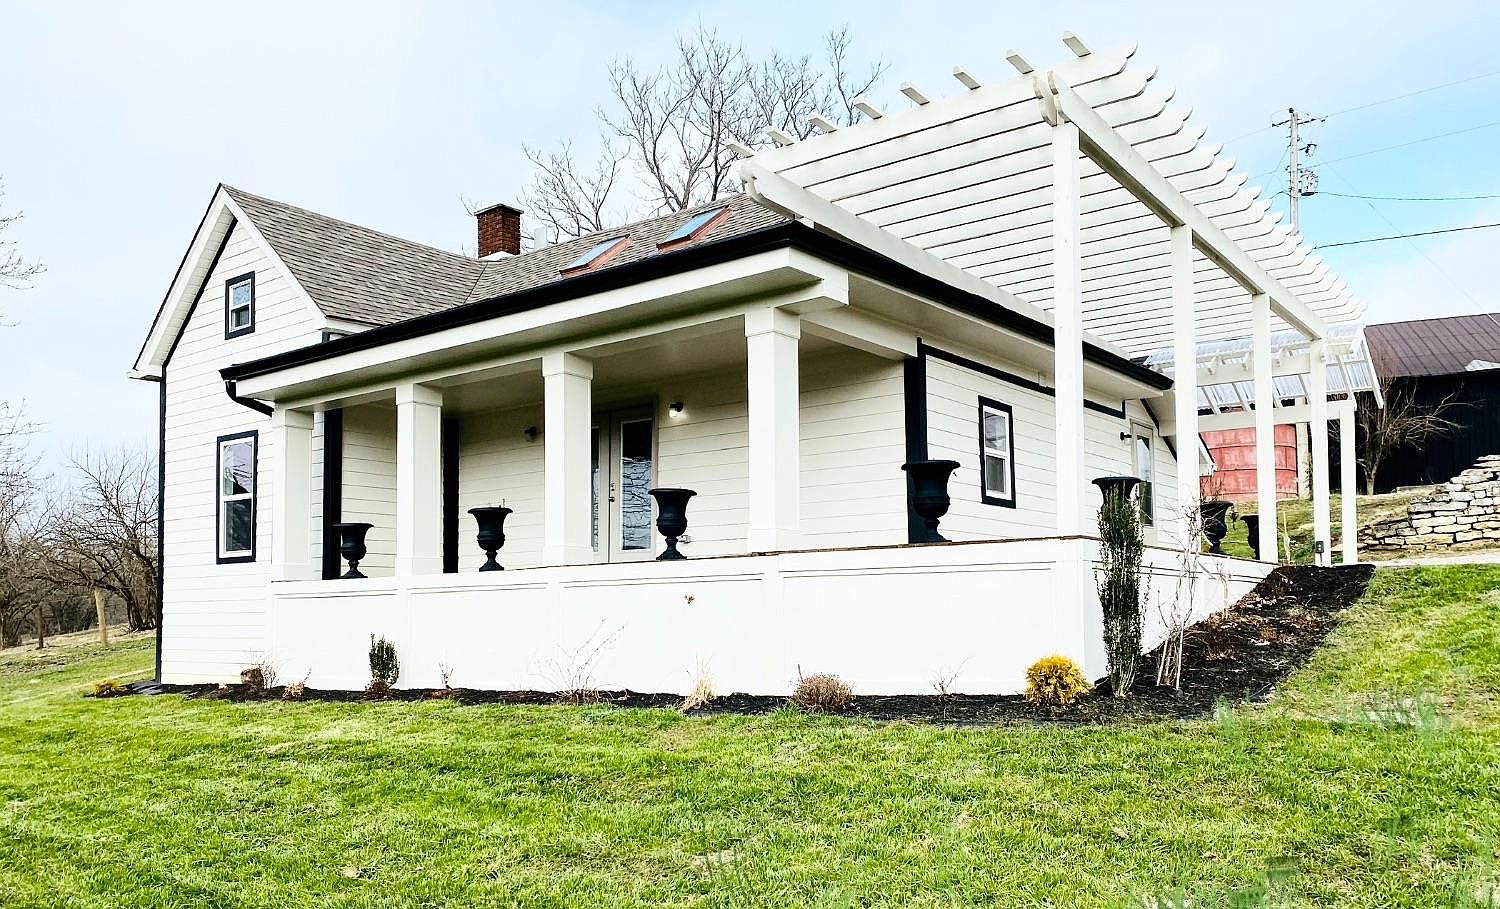 A white house with black trim and a porch.